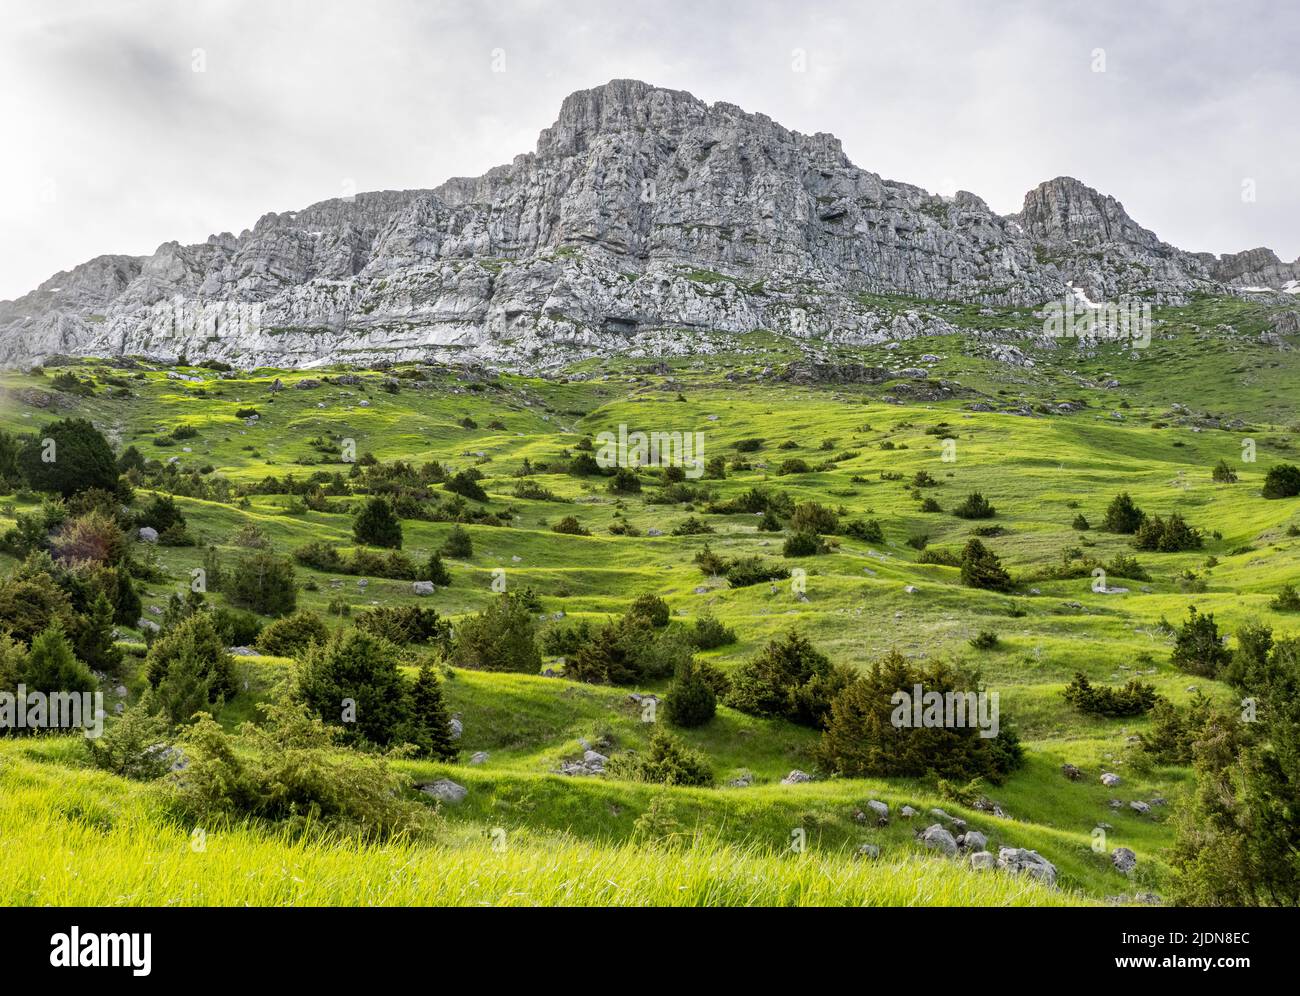 Alpine pasture and Juniper trees below the steep cliifs of Mount Tymphi in the Zagori region of Northern Greece Stock Photo